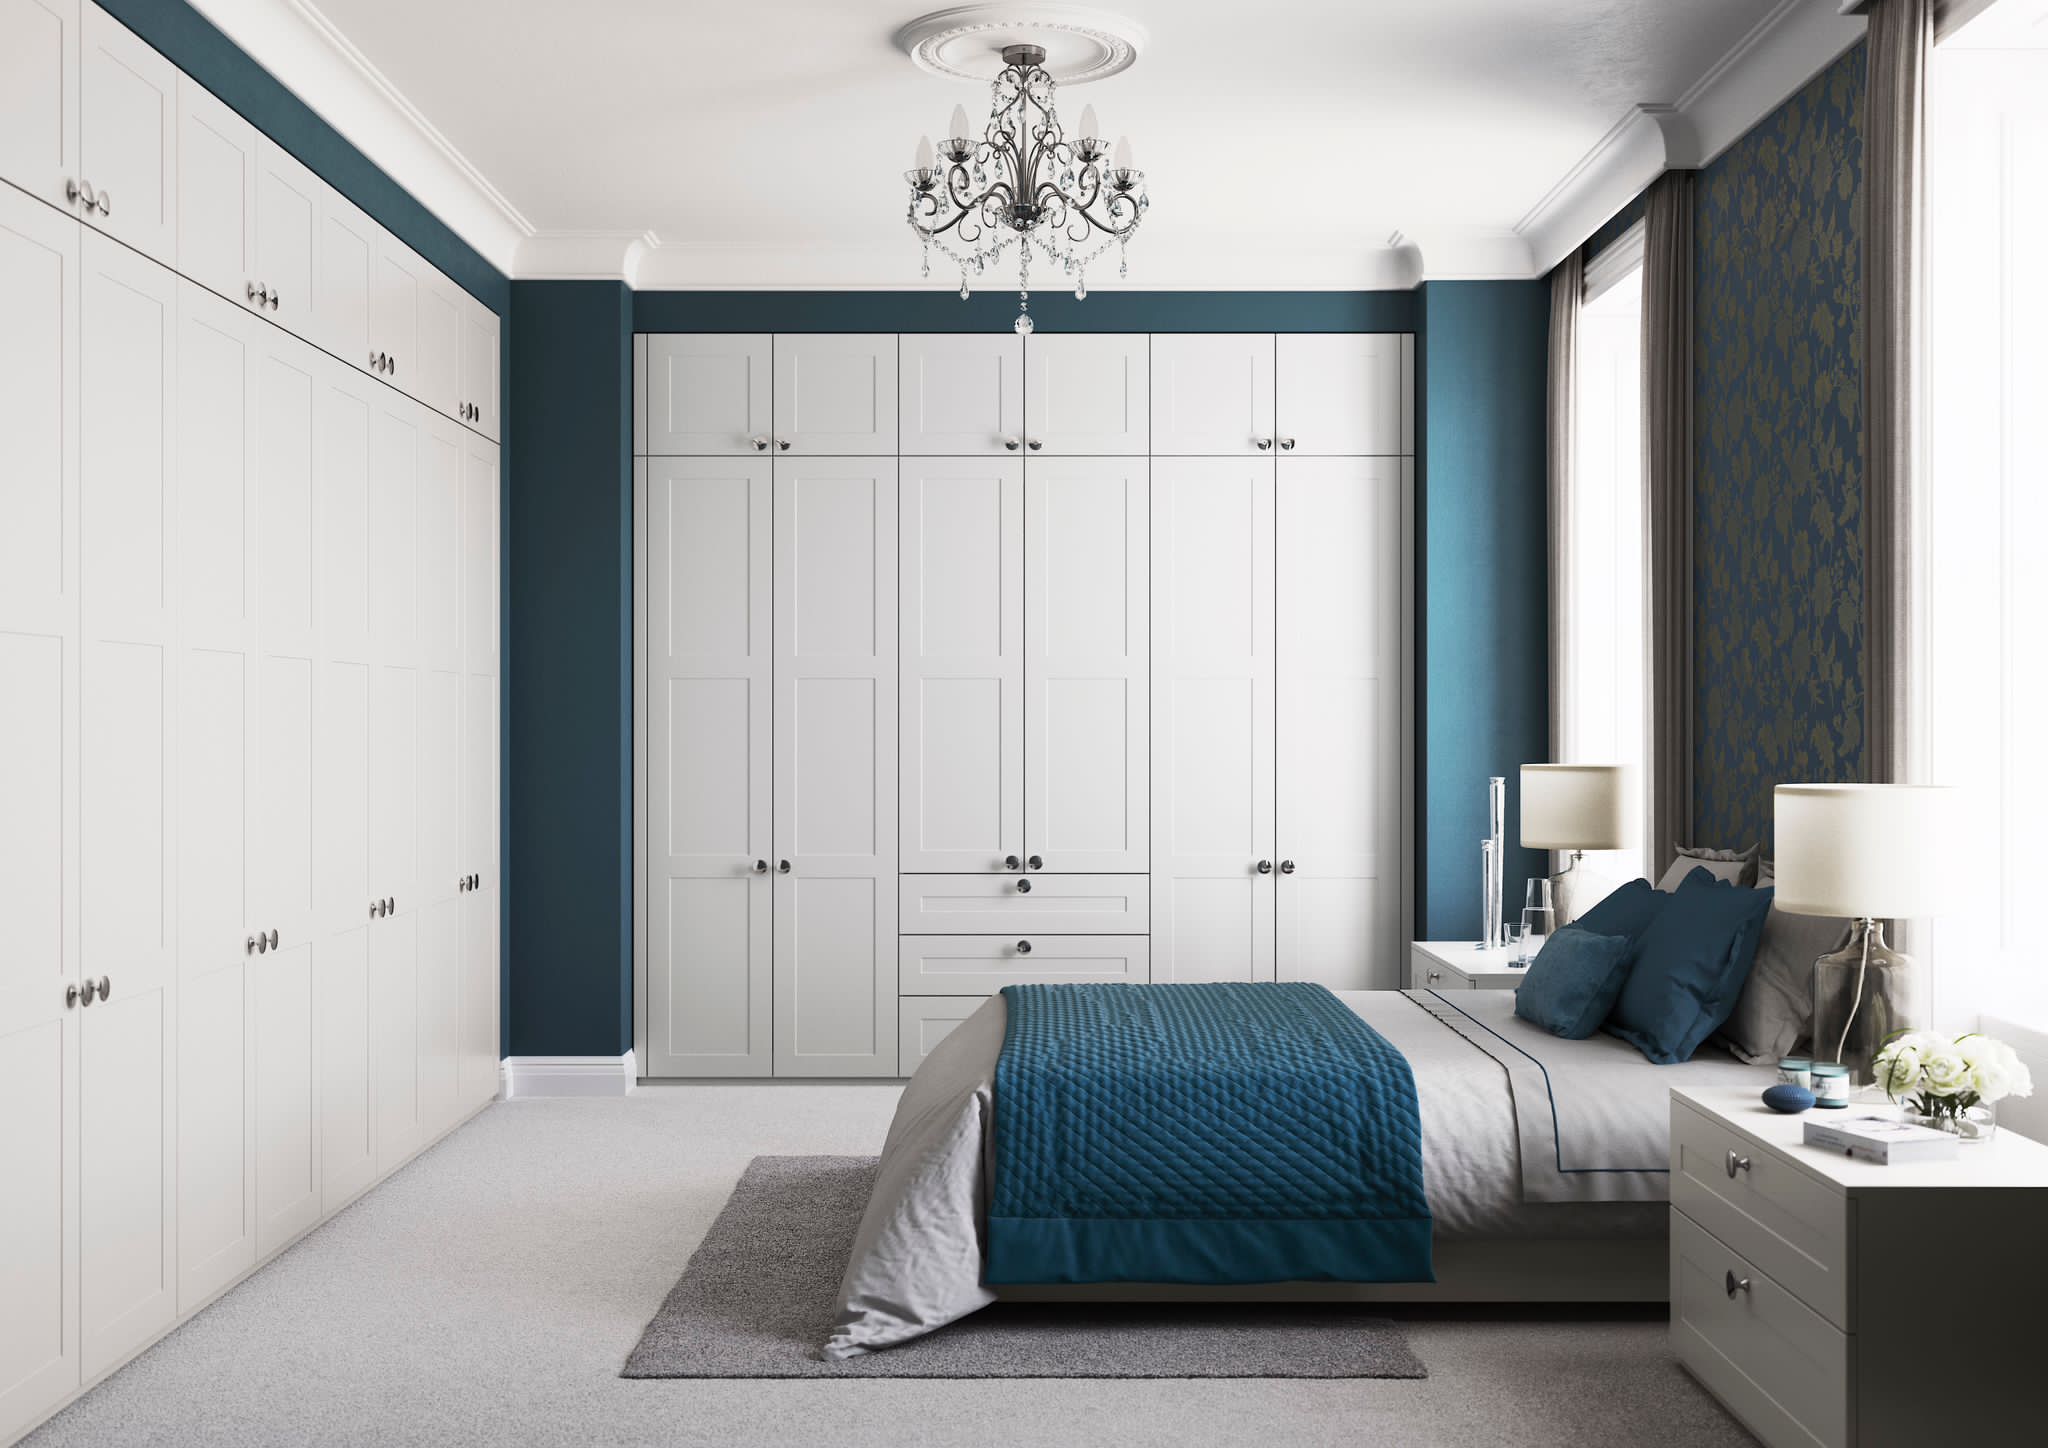 Dahlia Interiors Fitted Bedrooms with Fitted Wardrobes